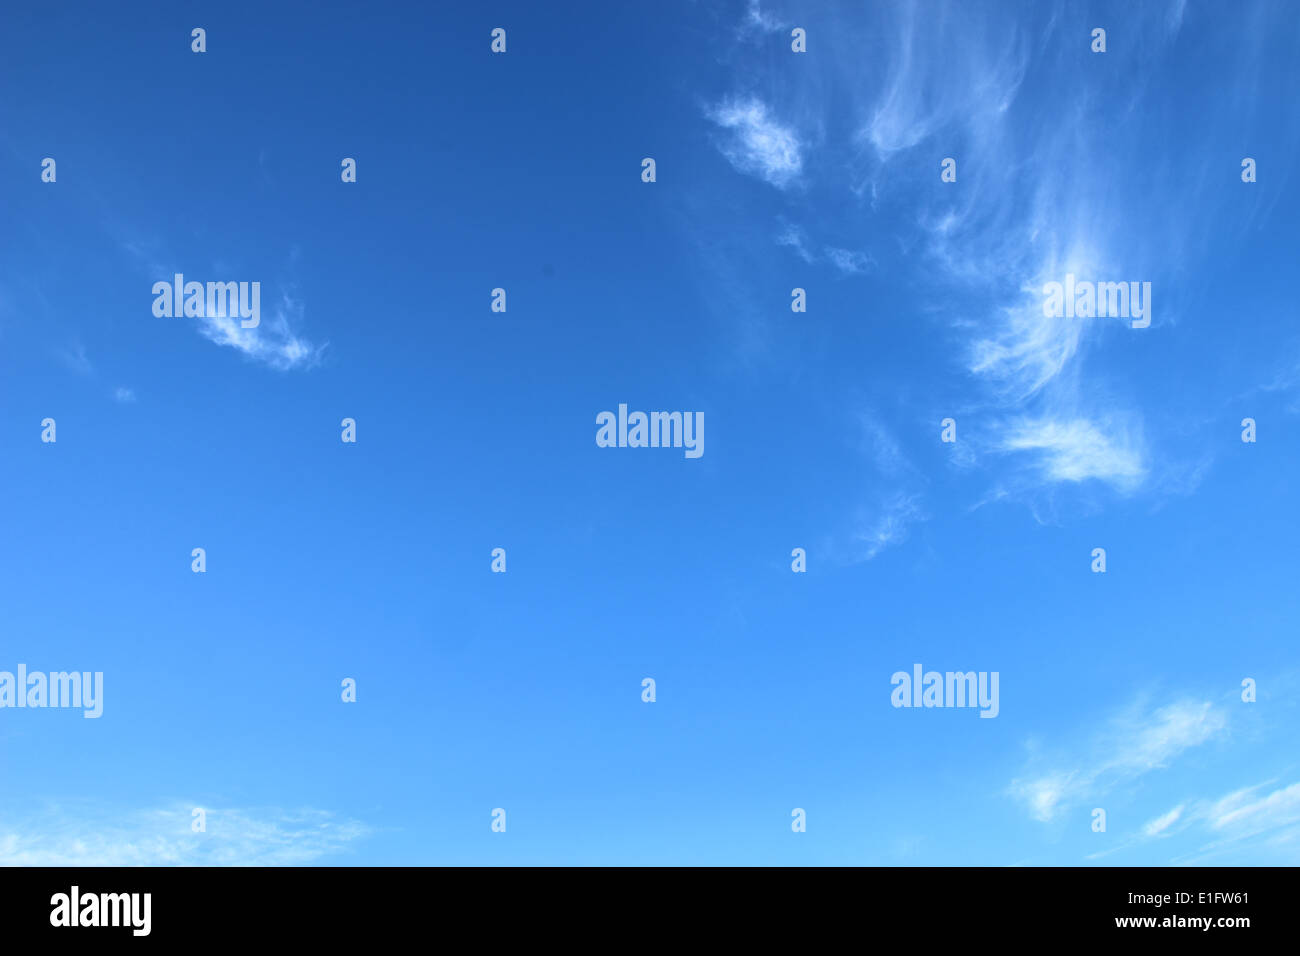 Blue sky and white clouds background Stock Photo